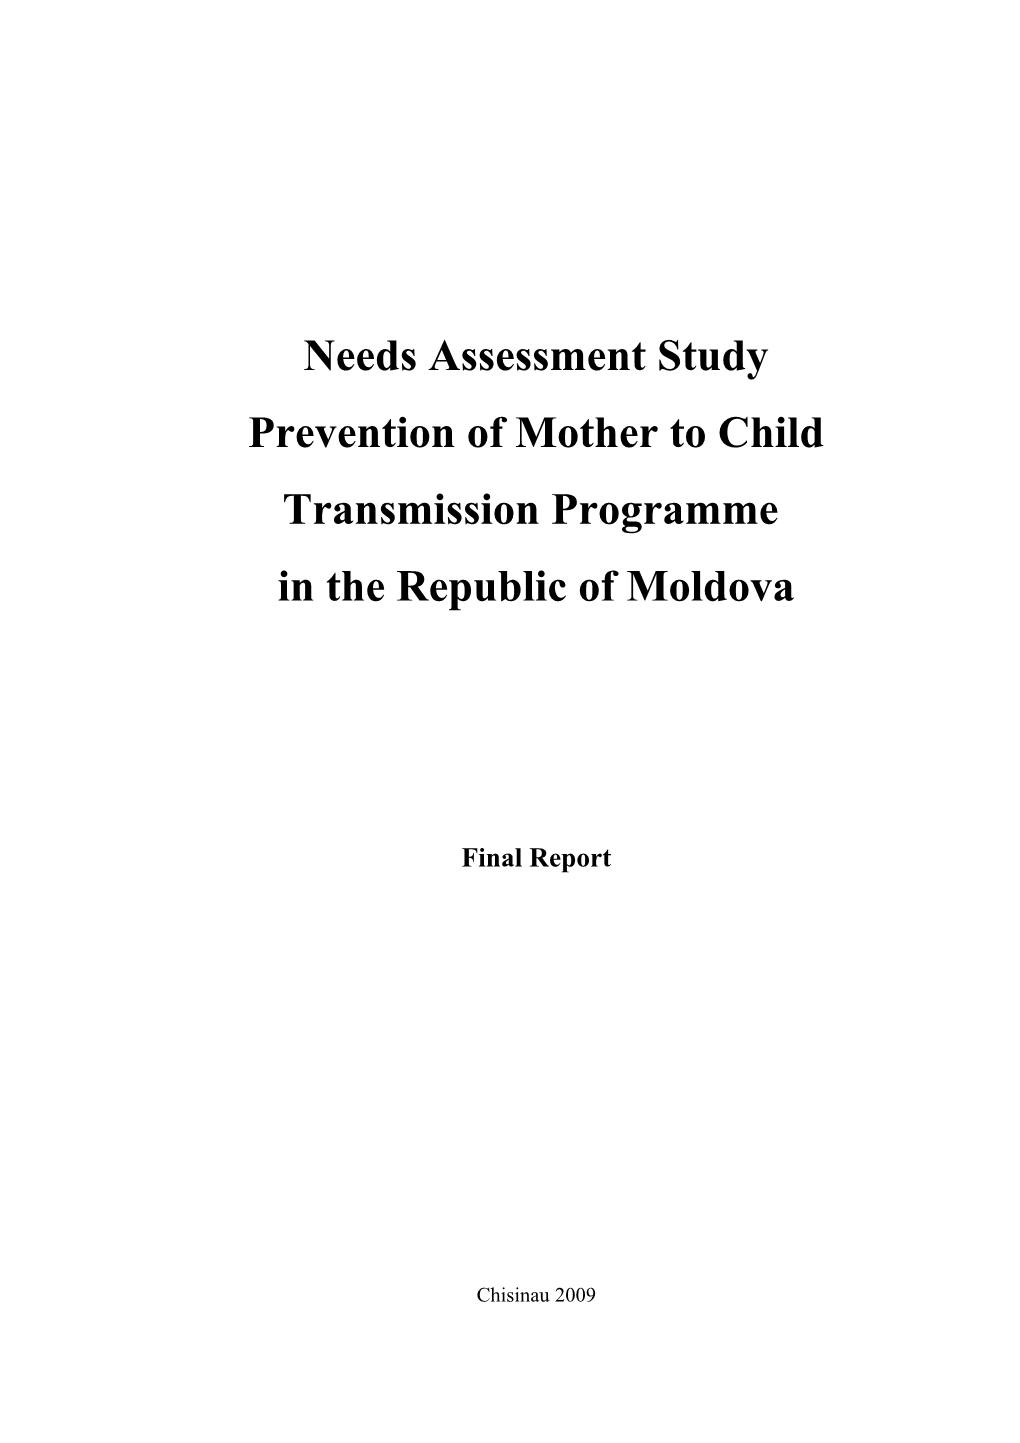 Assessment of PMTCT in Moldova